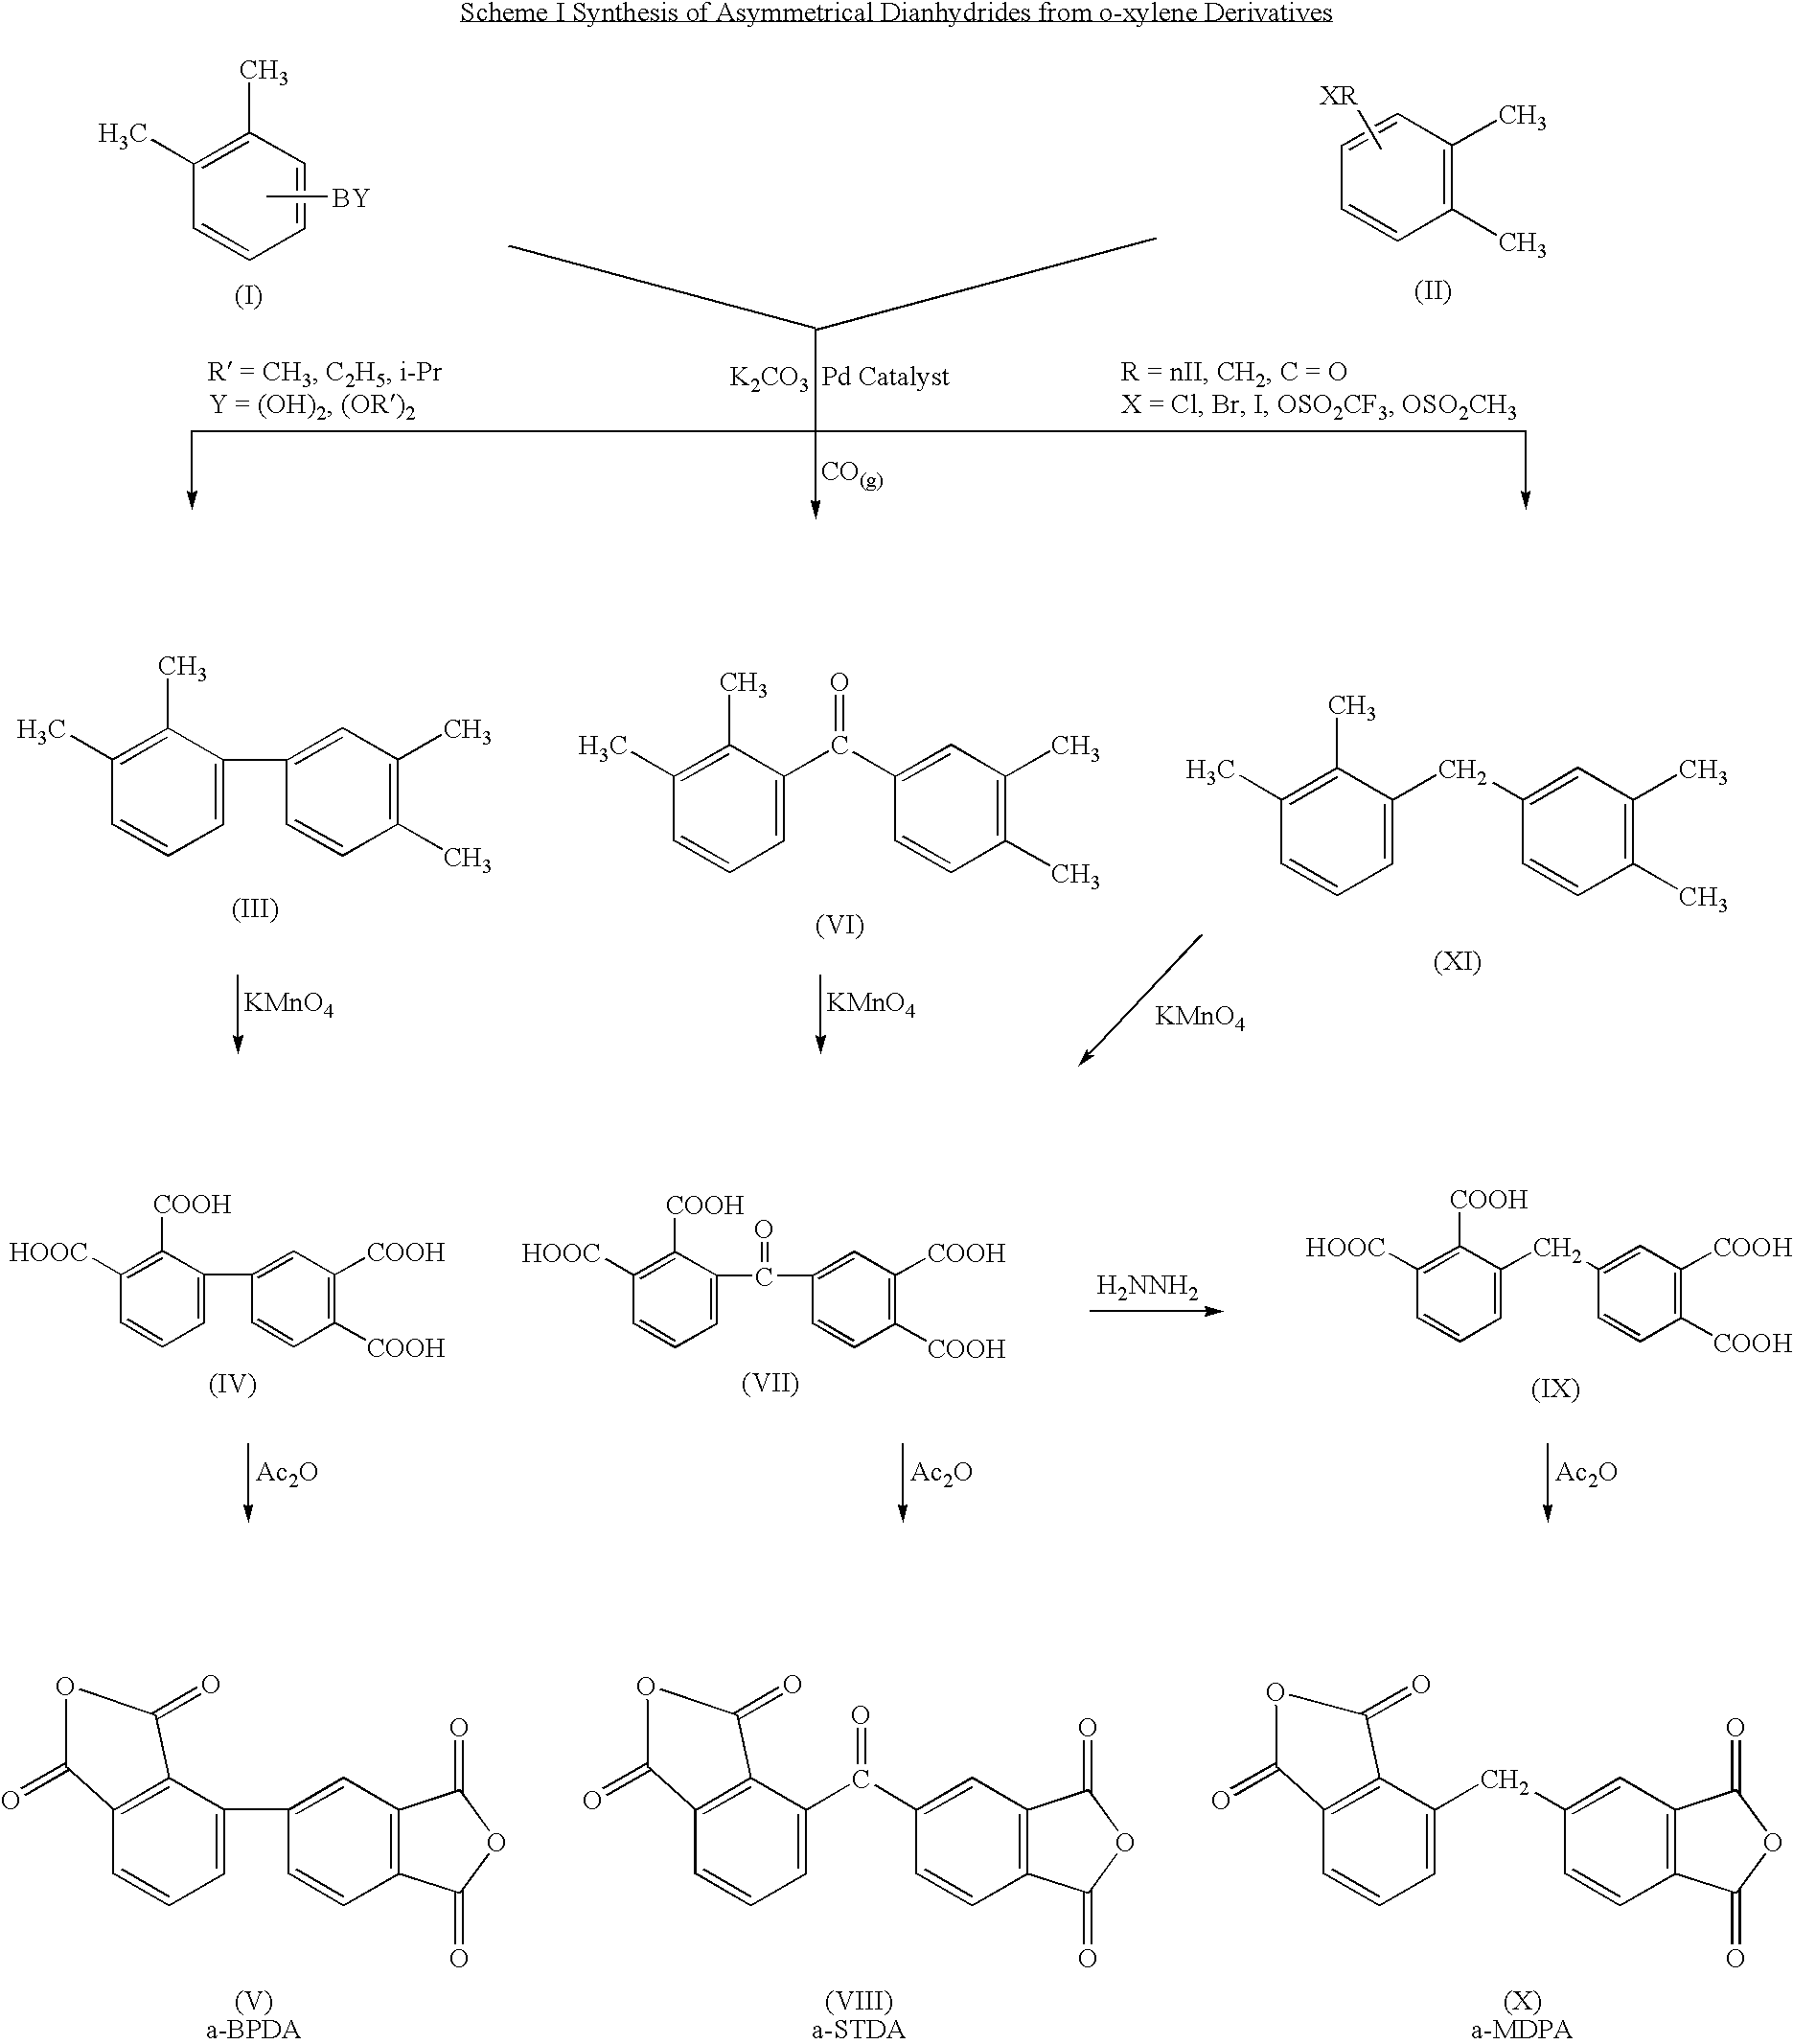 Synthesis of asymmetric tetracarboxylic acids and dianhydrides